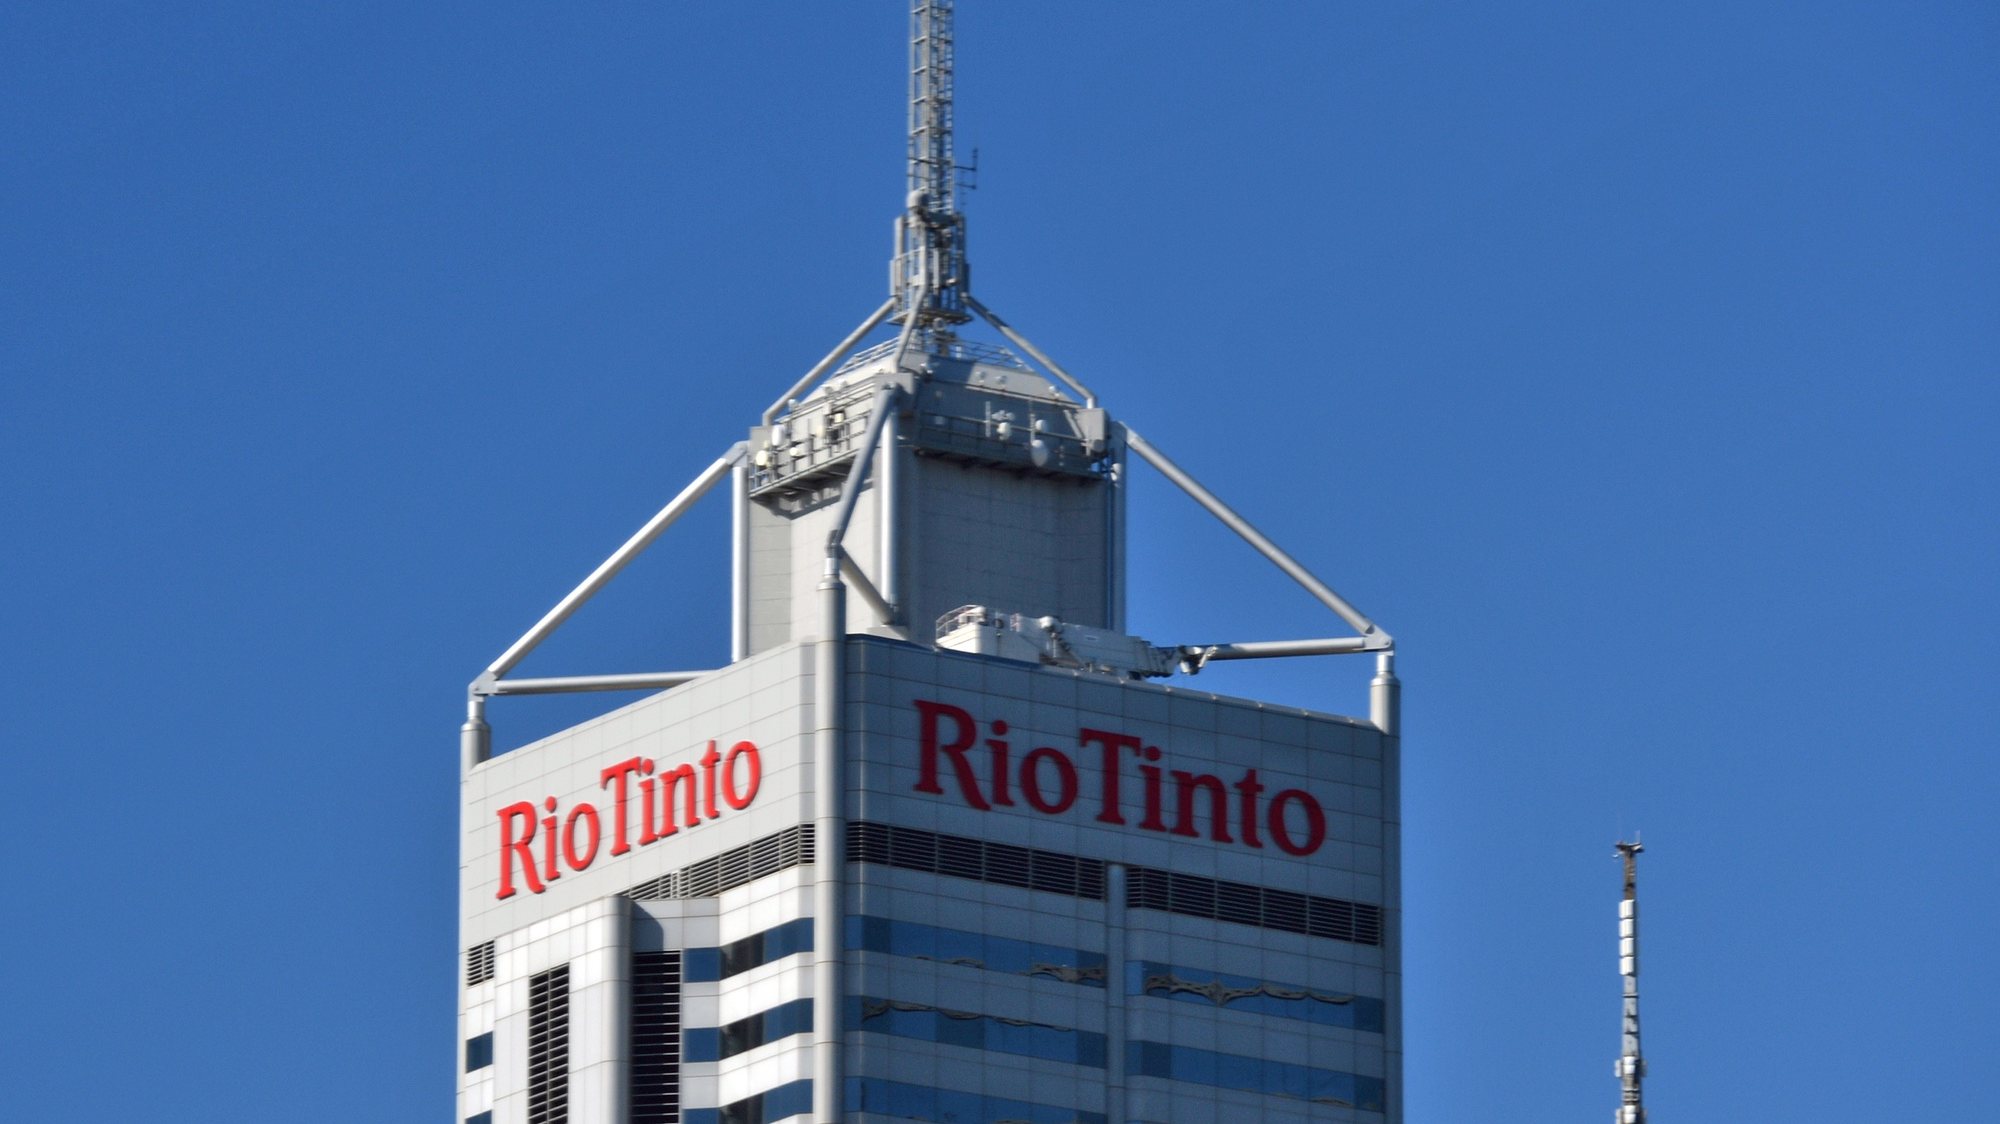 epa09017664 (FILE) - The logo of miner Rio Tinto is seen on an office tower in Perth, Australia, 23 May 2016 (reissued 17 February 2021). Mining conglomerate Rio Tinto is to release its full year 2020 results announcement on 17 February 2021.  EPA/MICK TSIKAS AUSTRALIA AND NEW ZEALAND OUT